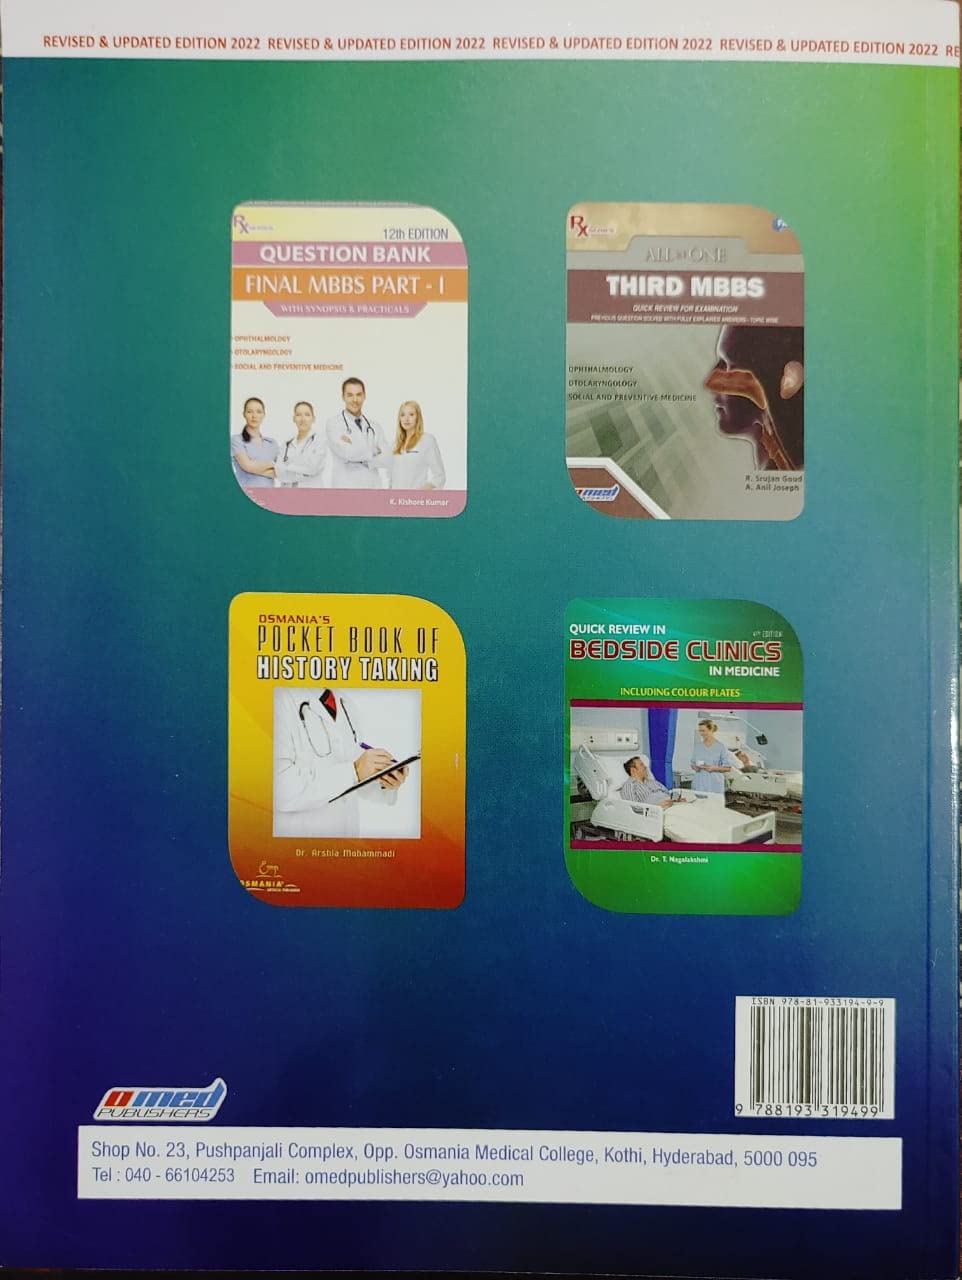 RX Series Quick Review For Examination Preventive & Social Medicine 7th Edition (Revised & Updated Edition 2022)